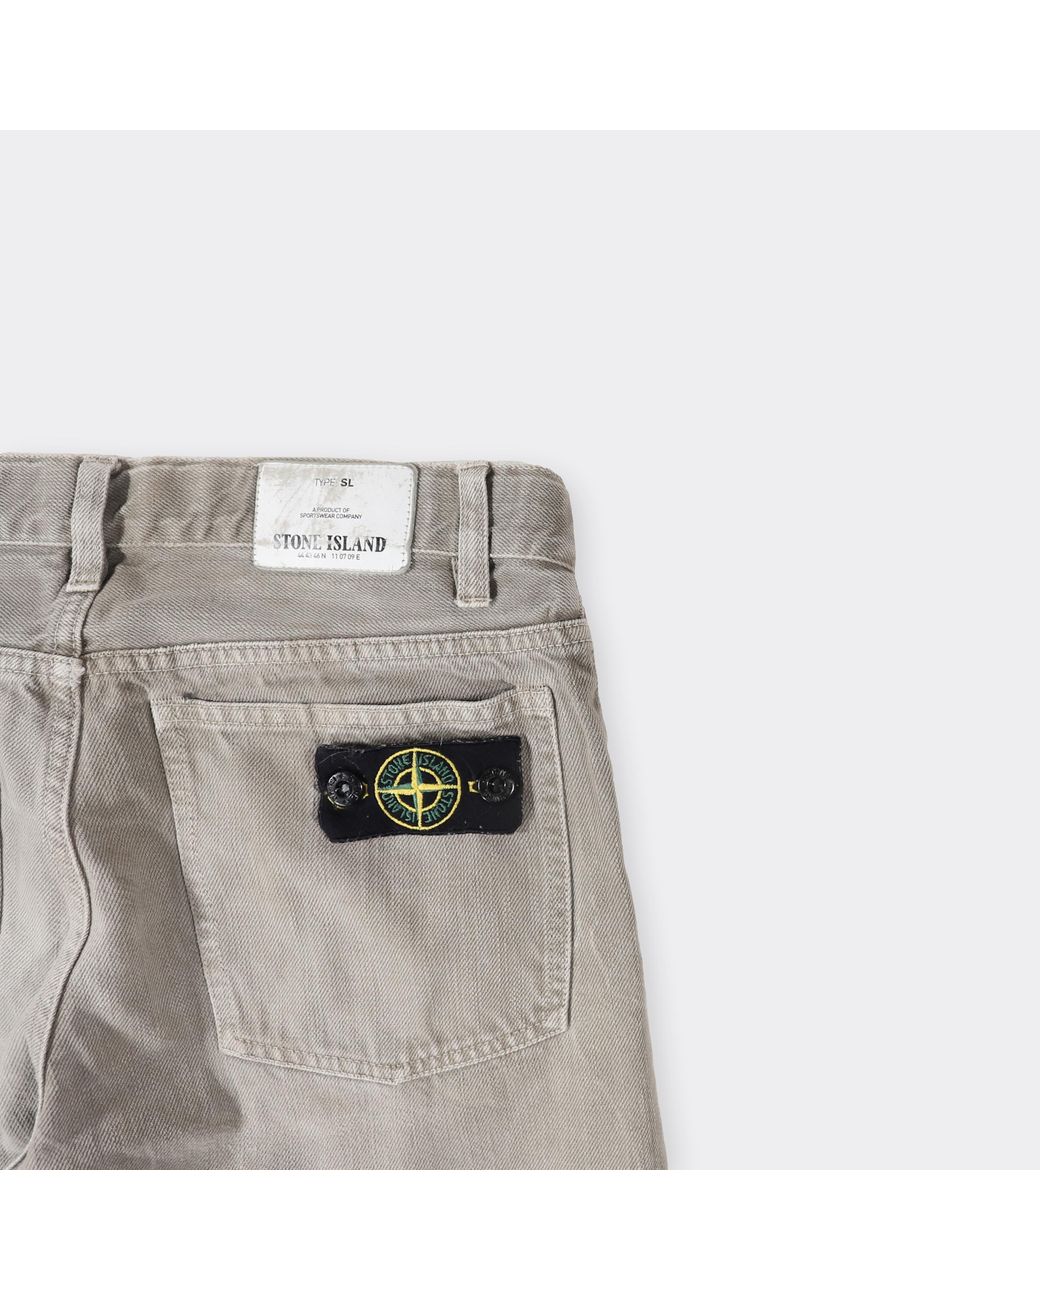 Stone Island Womens Vintage Jeans in Gray | Lyst